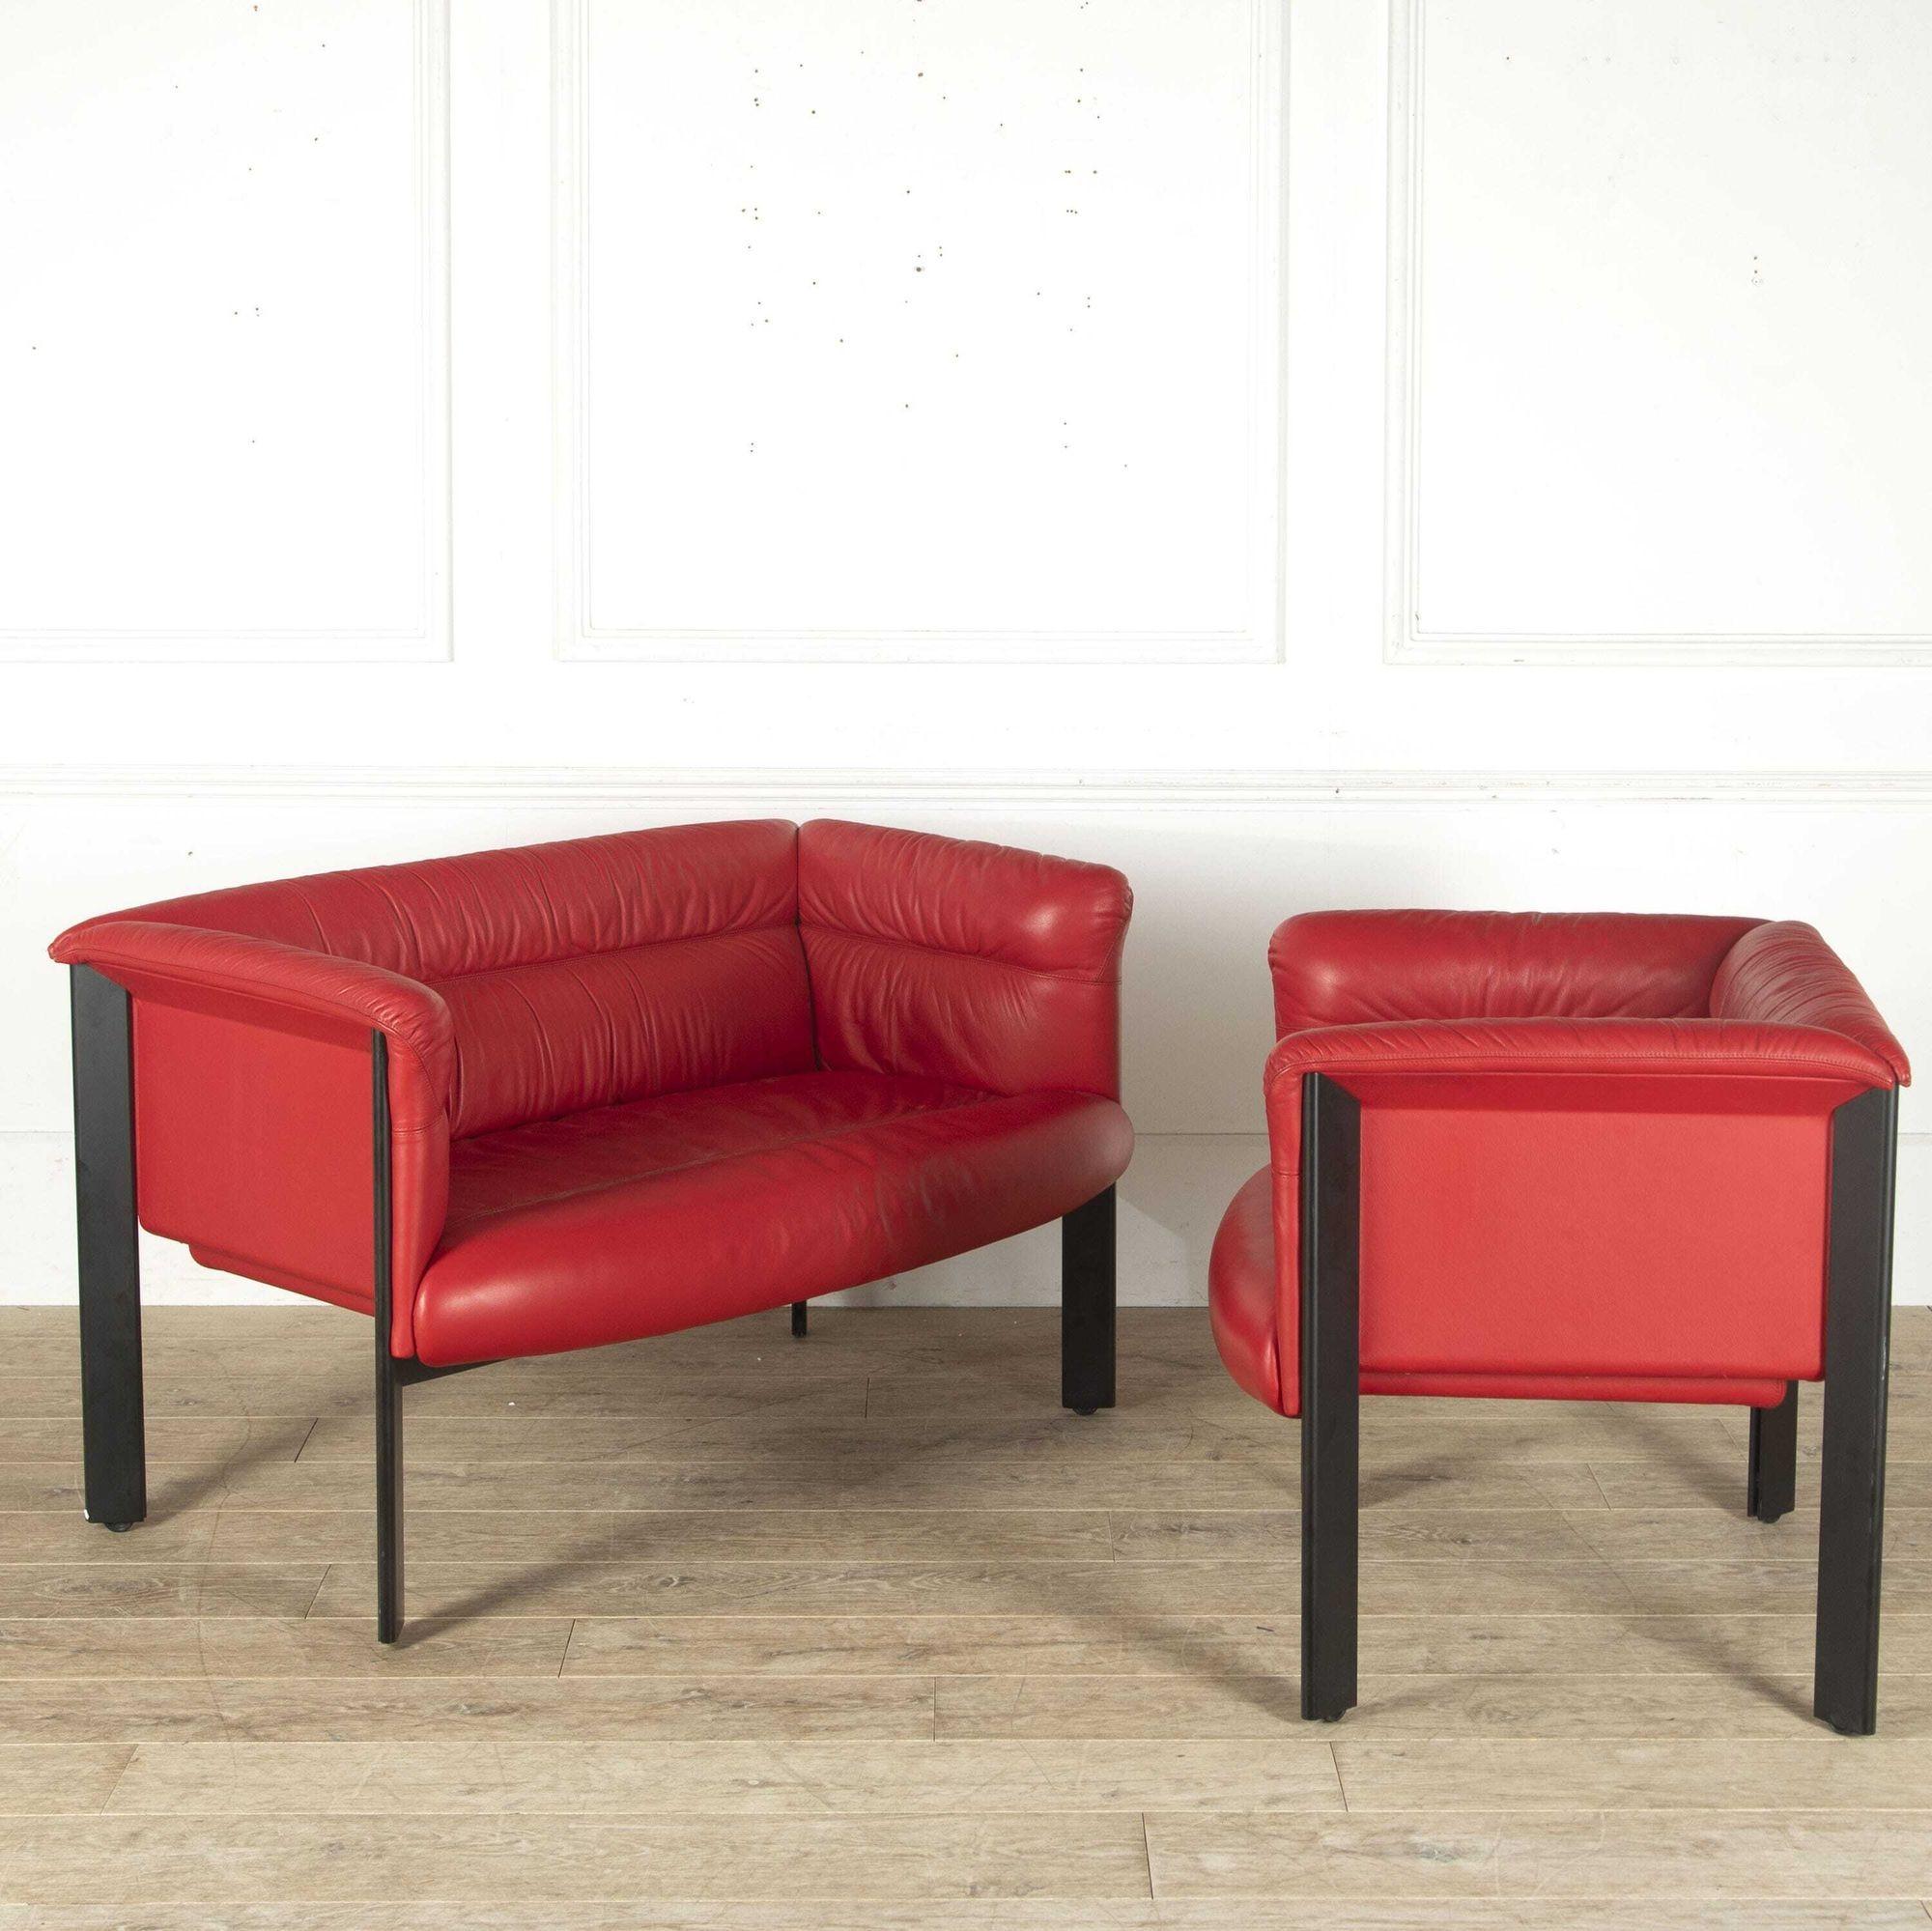 Set of lounge seating by Marco Zanuso. This set comprises a pair of two-seat sofas and a pair of armchairs. 
These chairs are the 'Interlude' model, designed by Zanuso in the late 1980s. The designs were to mark the 75th anniversary of Poltrona